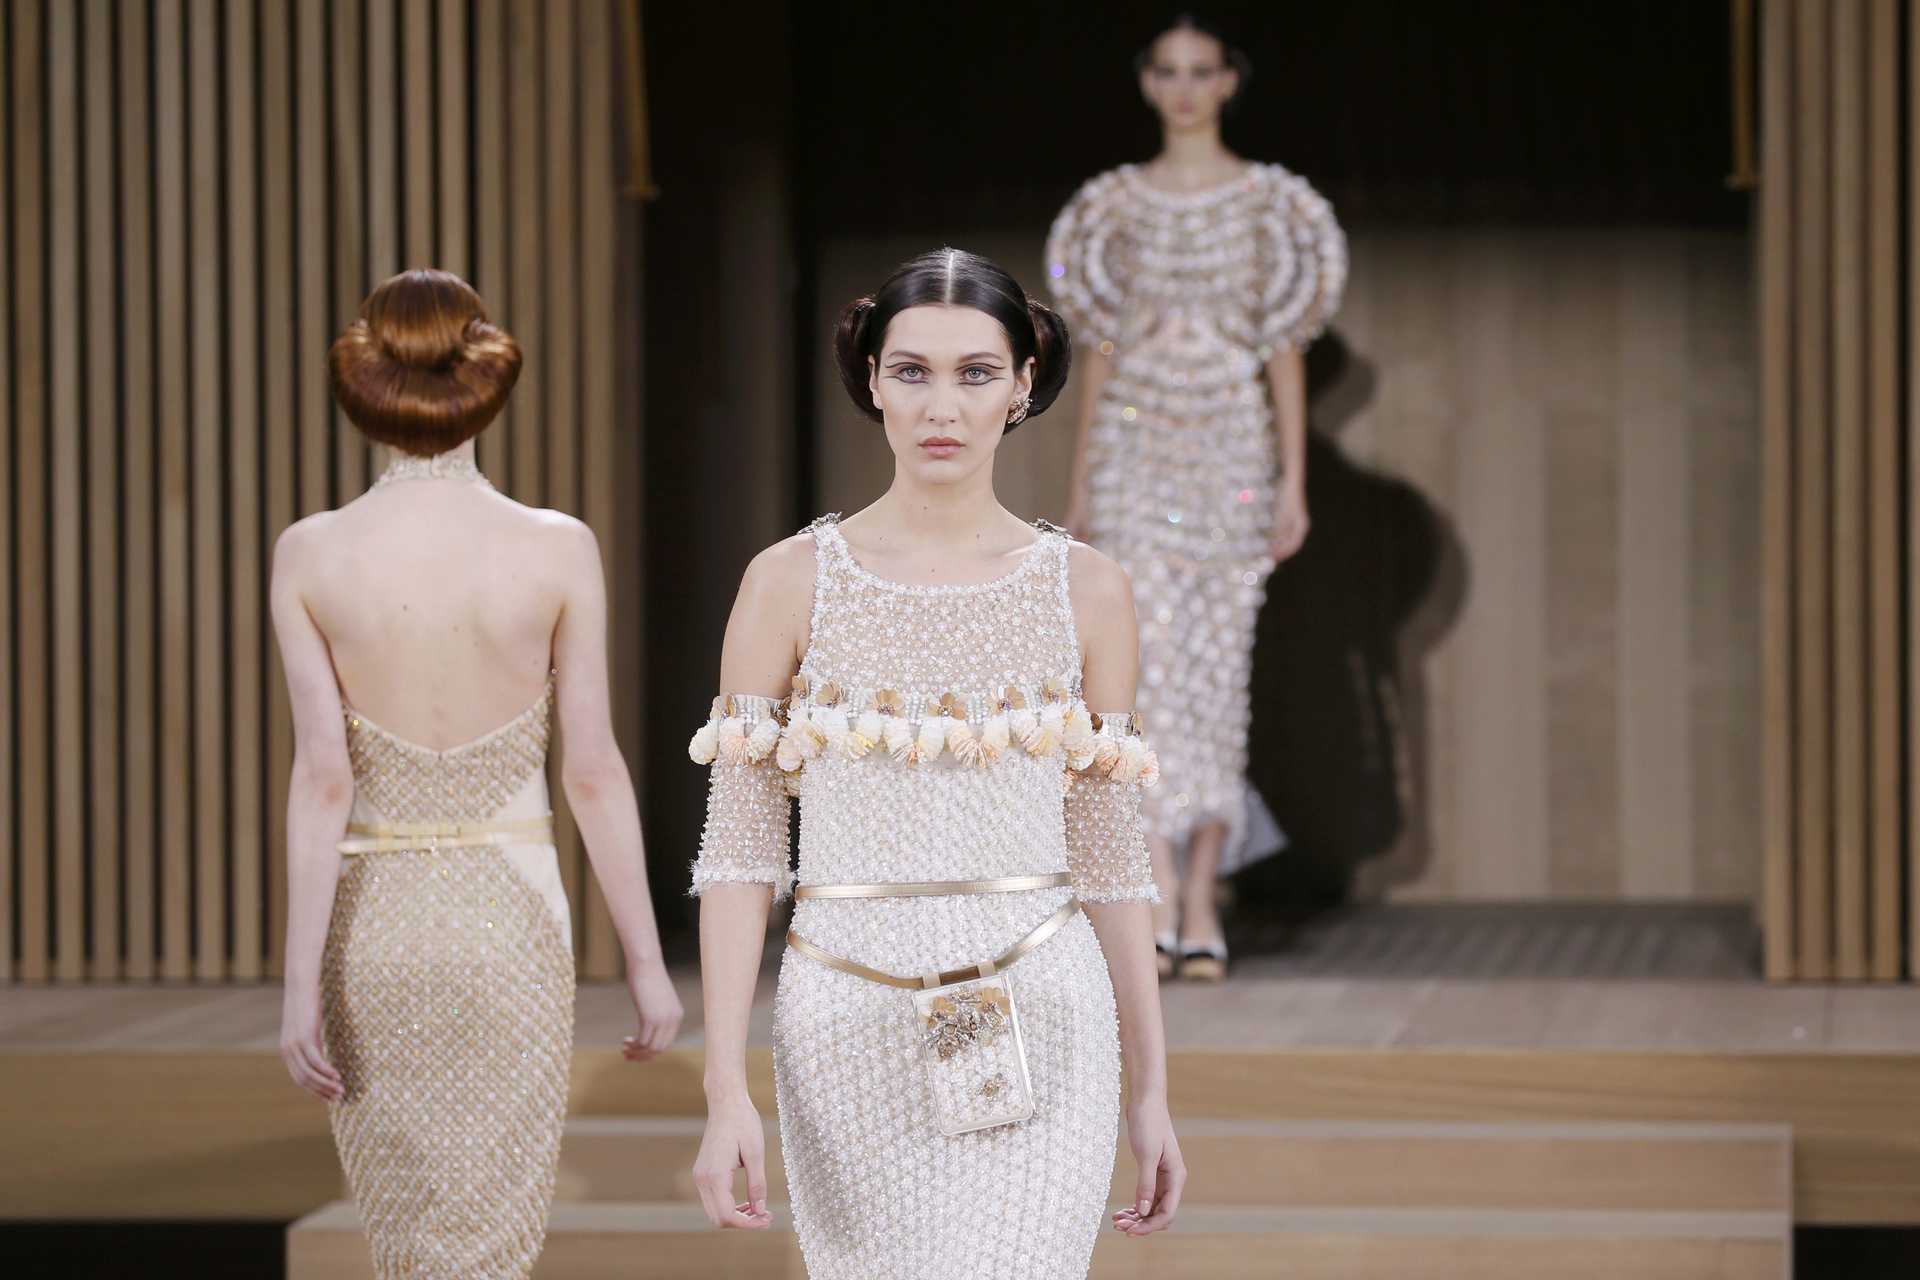 Model Bella Hadid presents a creation by German designer Karl Lagerfeld as part of his Haute Couture Spring/Summer 2016 collection for fashion house Chanel at the Grand Palais in Paris